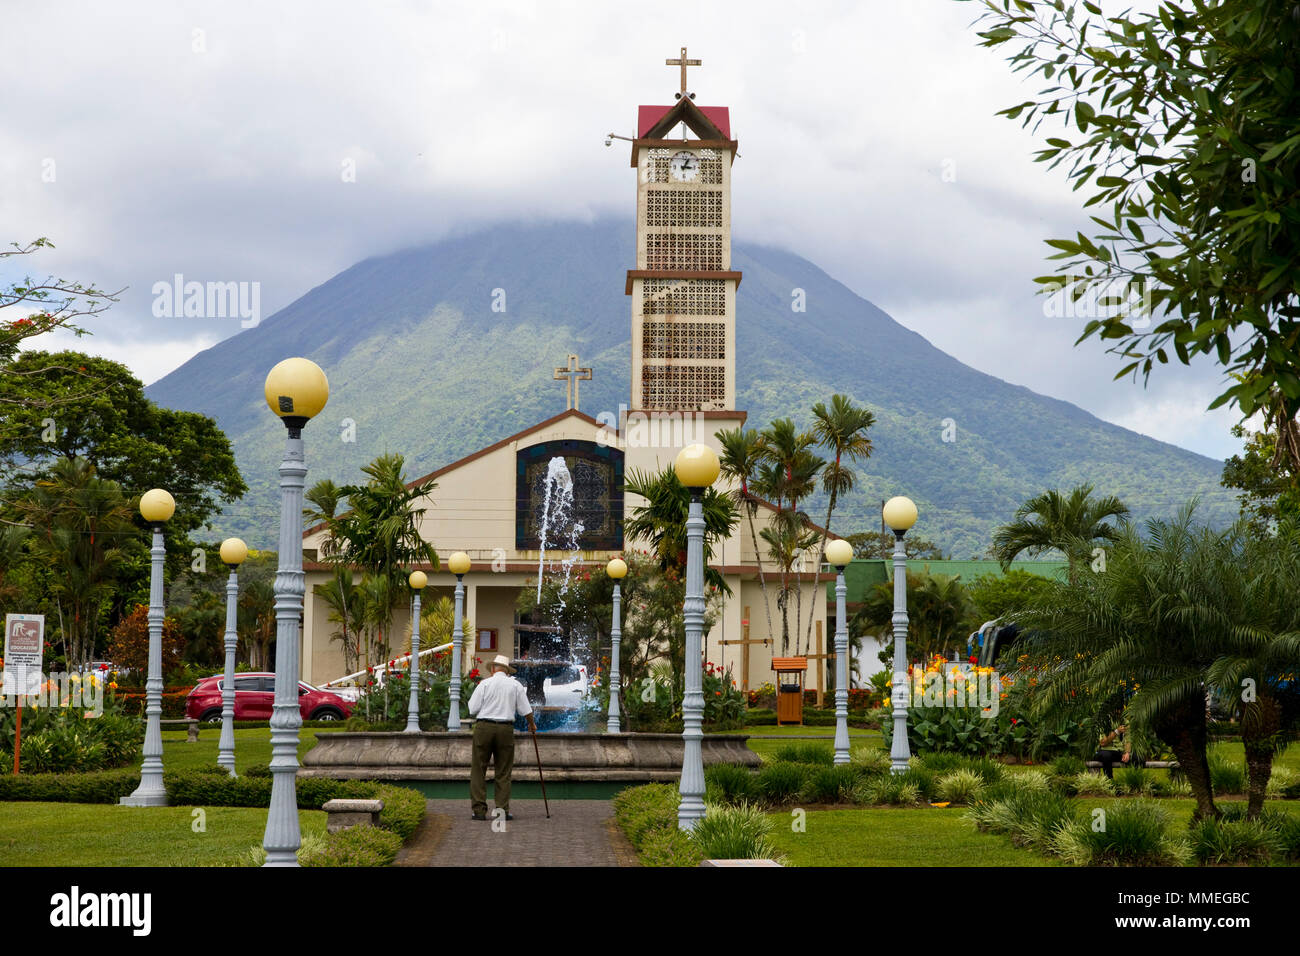 Sarapiqui town and volcano in northern Costa Rica Stock Photo